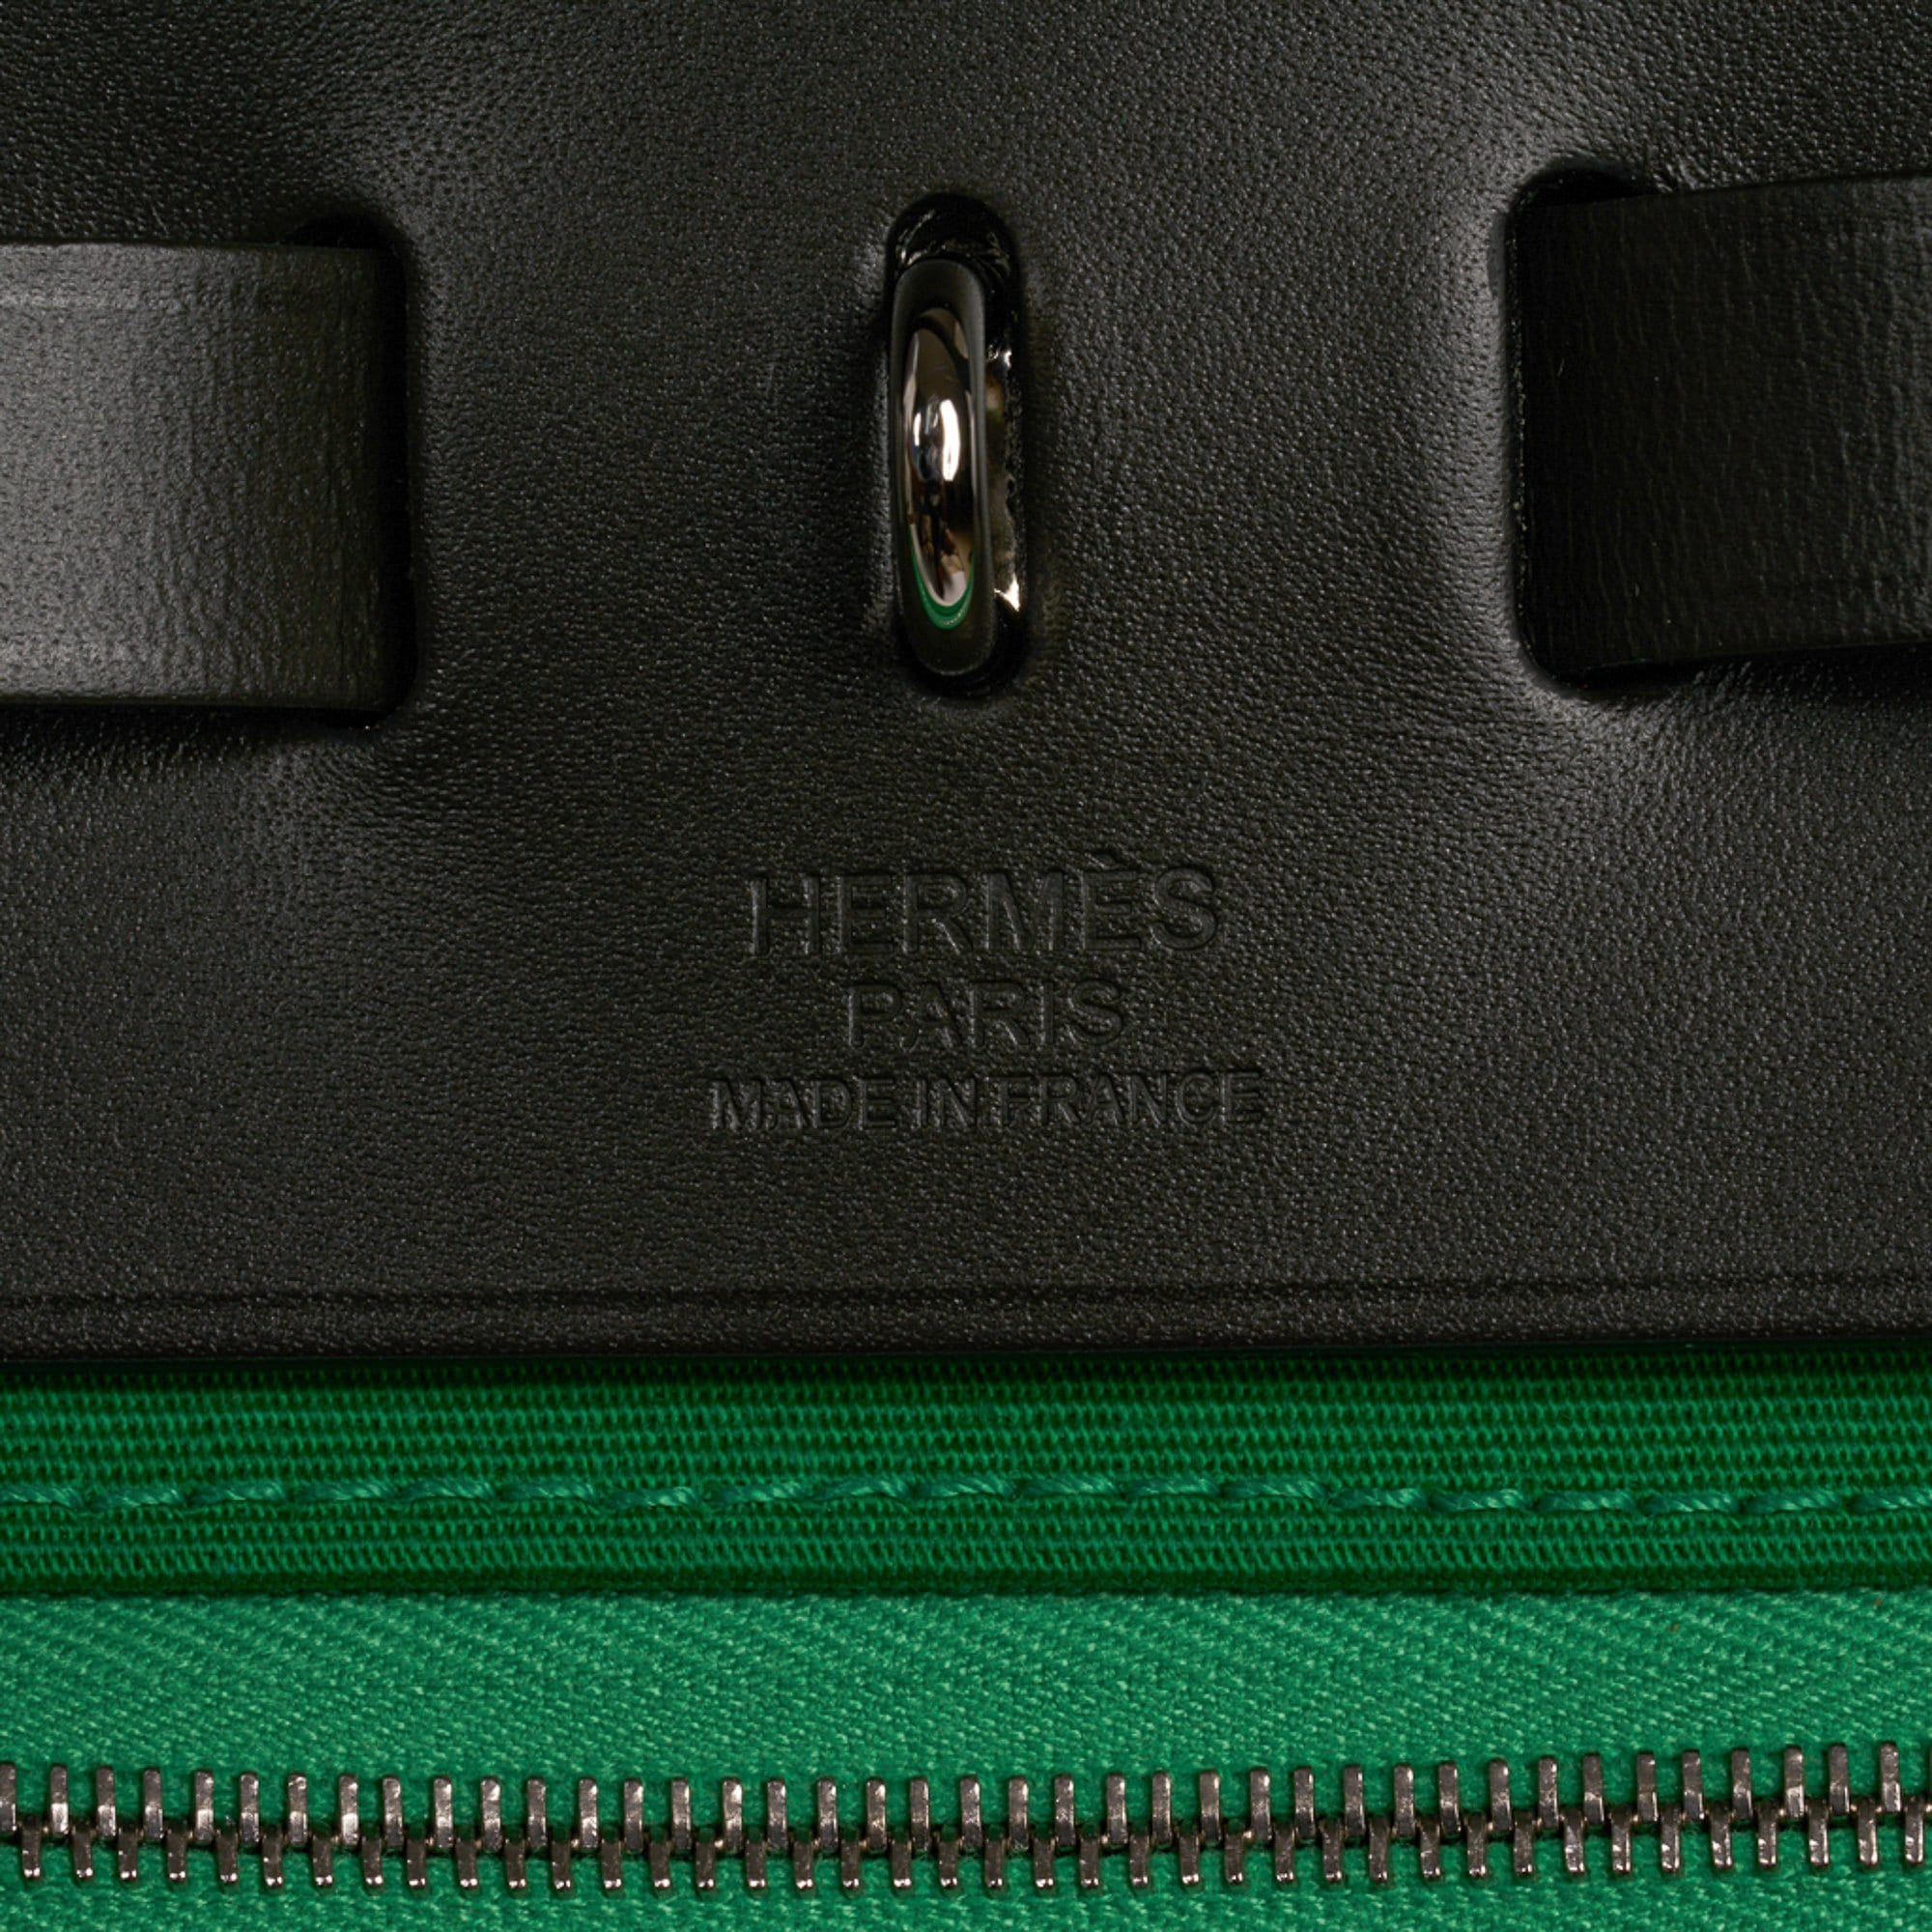 Hermes Herbag Zip Lime PM 31 Toile Berline / Vache Hunter Leather New w/ Box